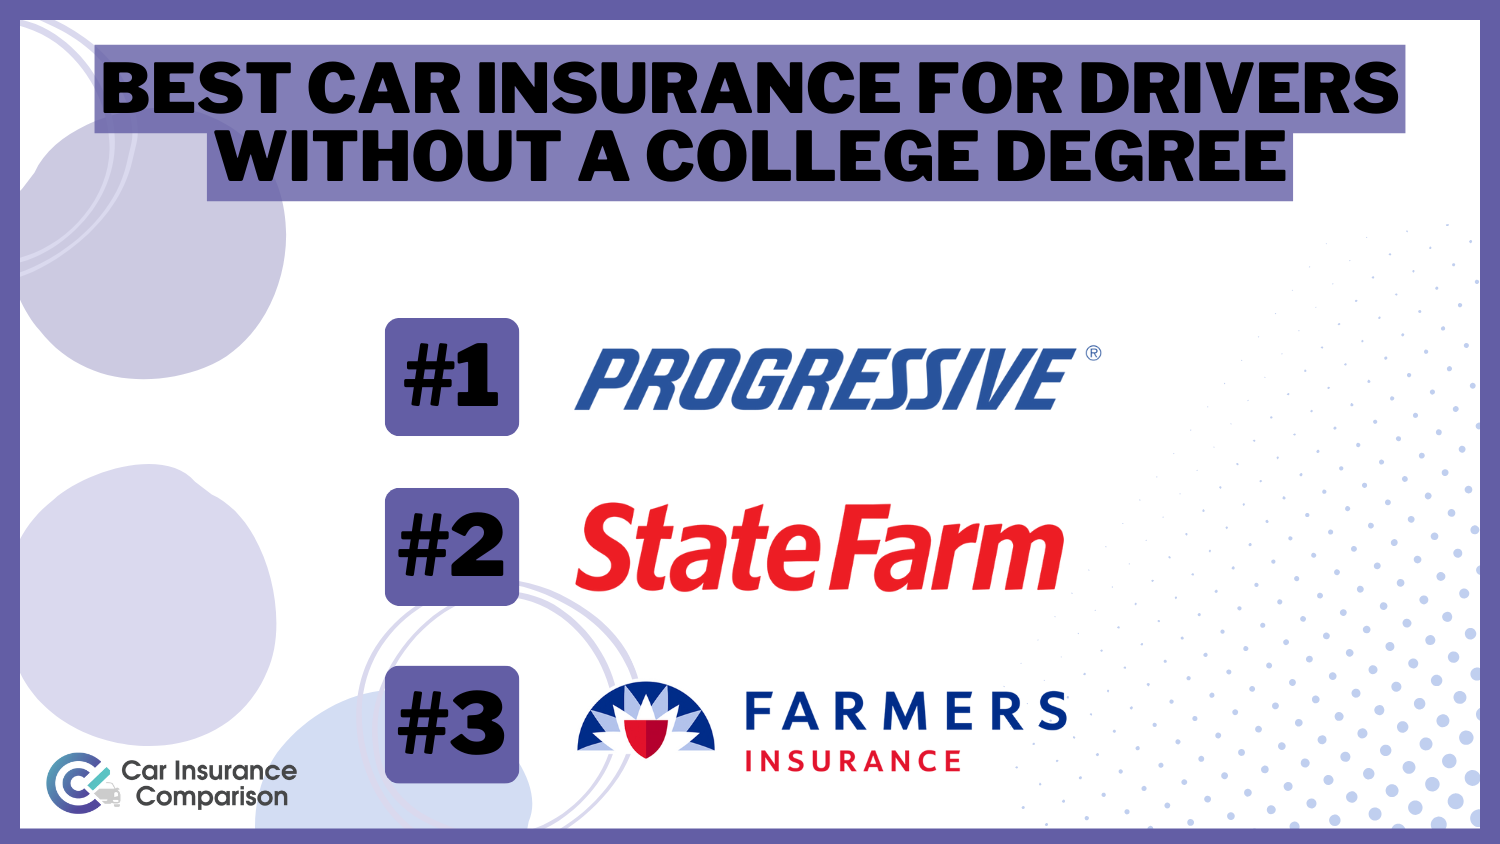 Best Car Insurance for Drivers Without a College Degree: Progressive, State Farm, and Farmers